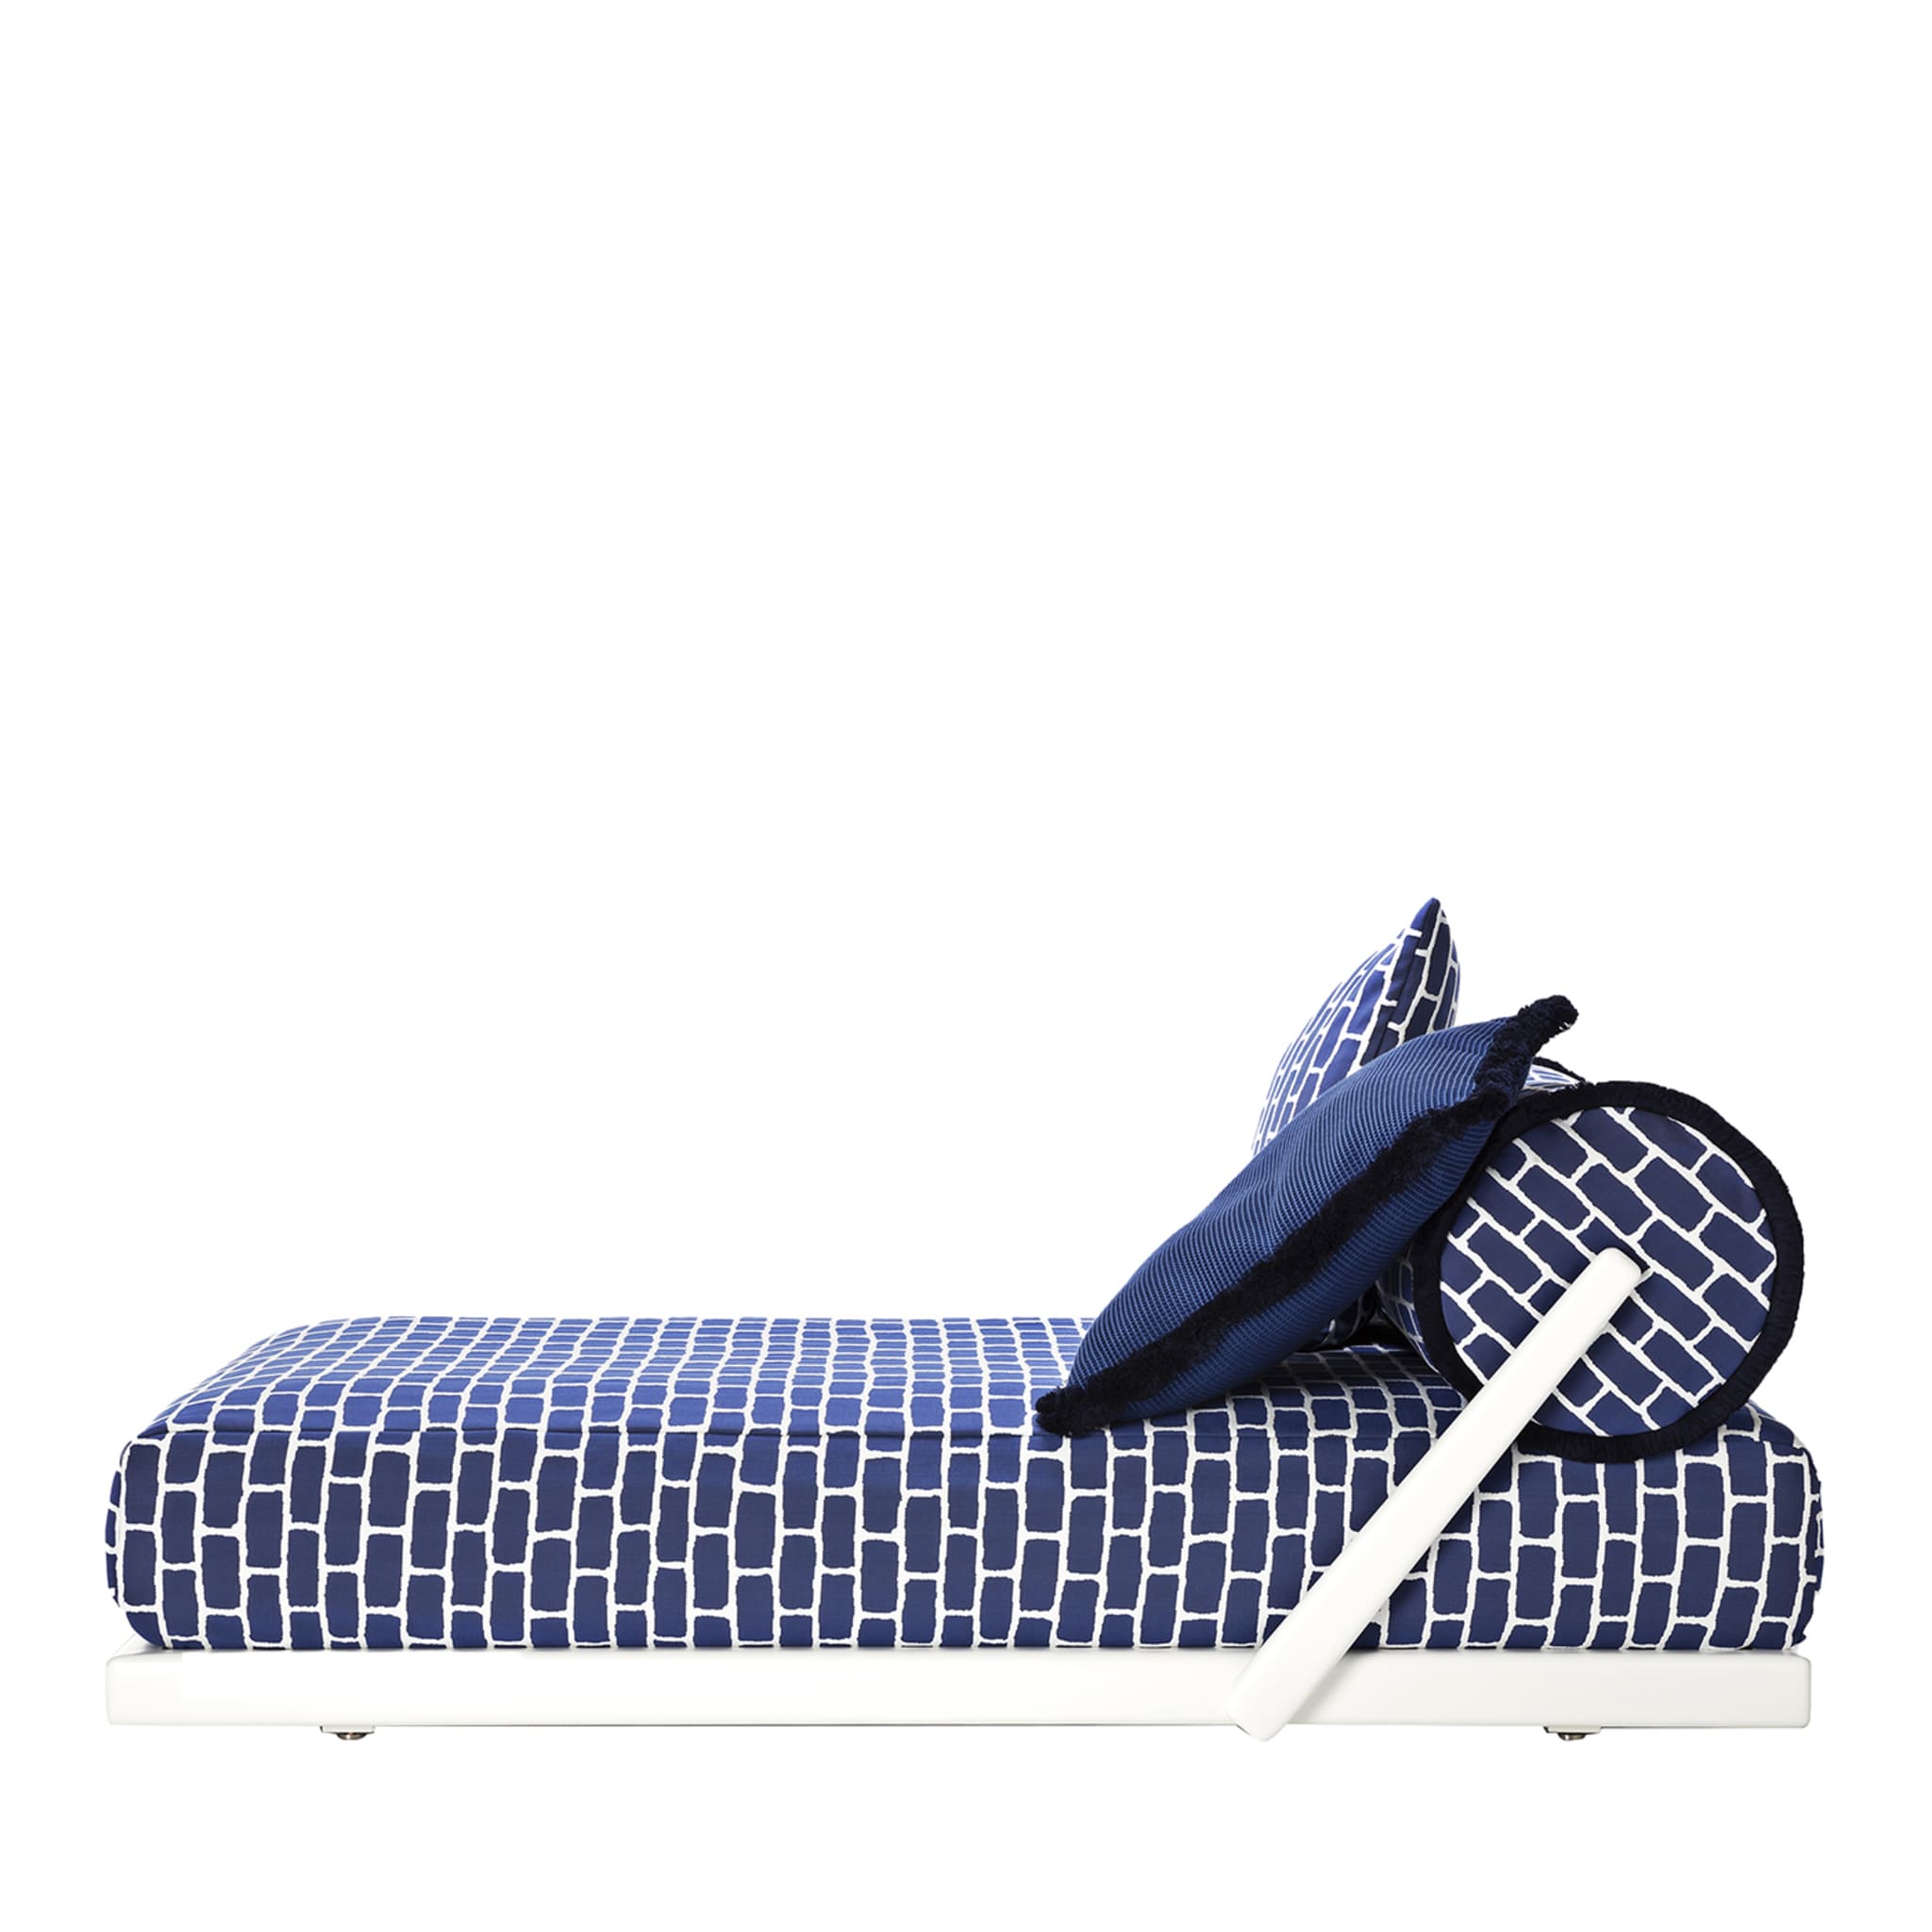 Sunset Roll Daybed by Paola Navone - Main view